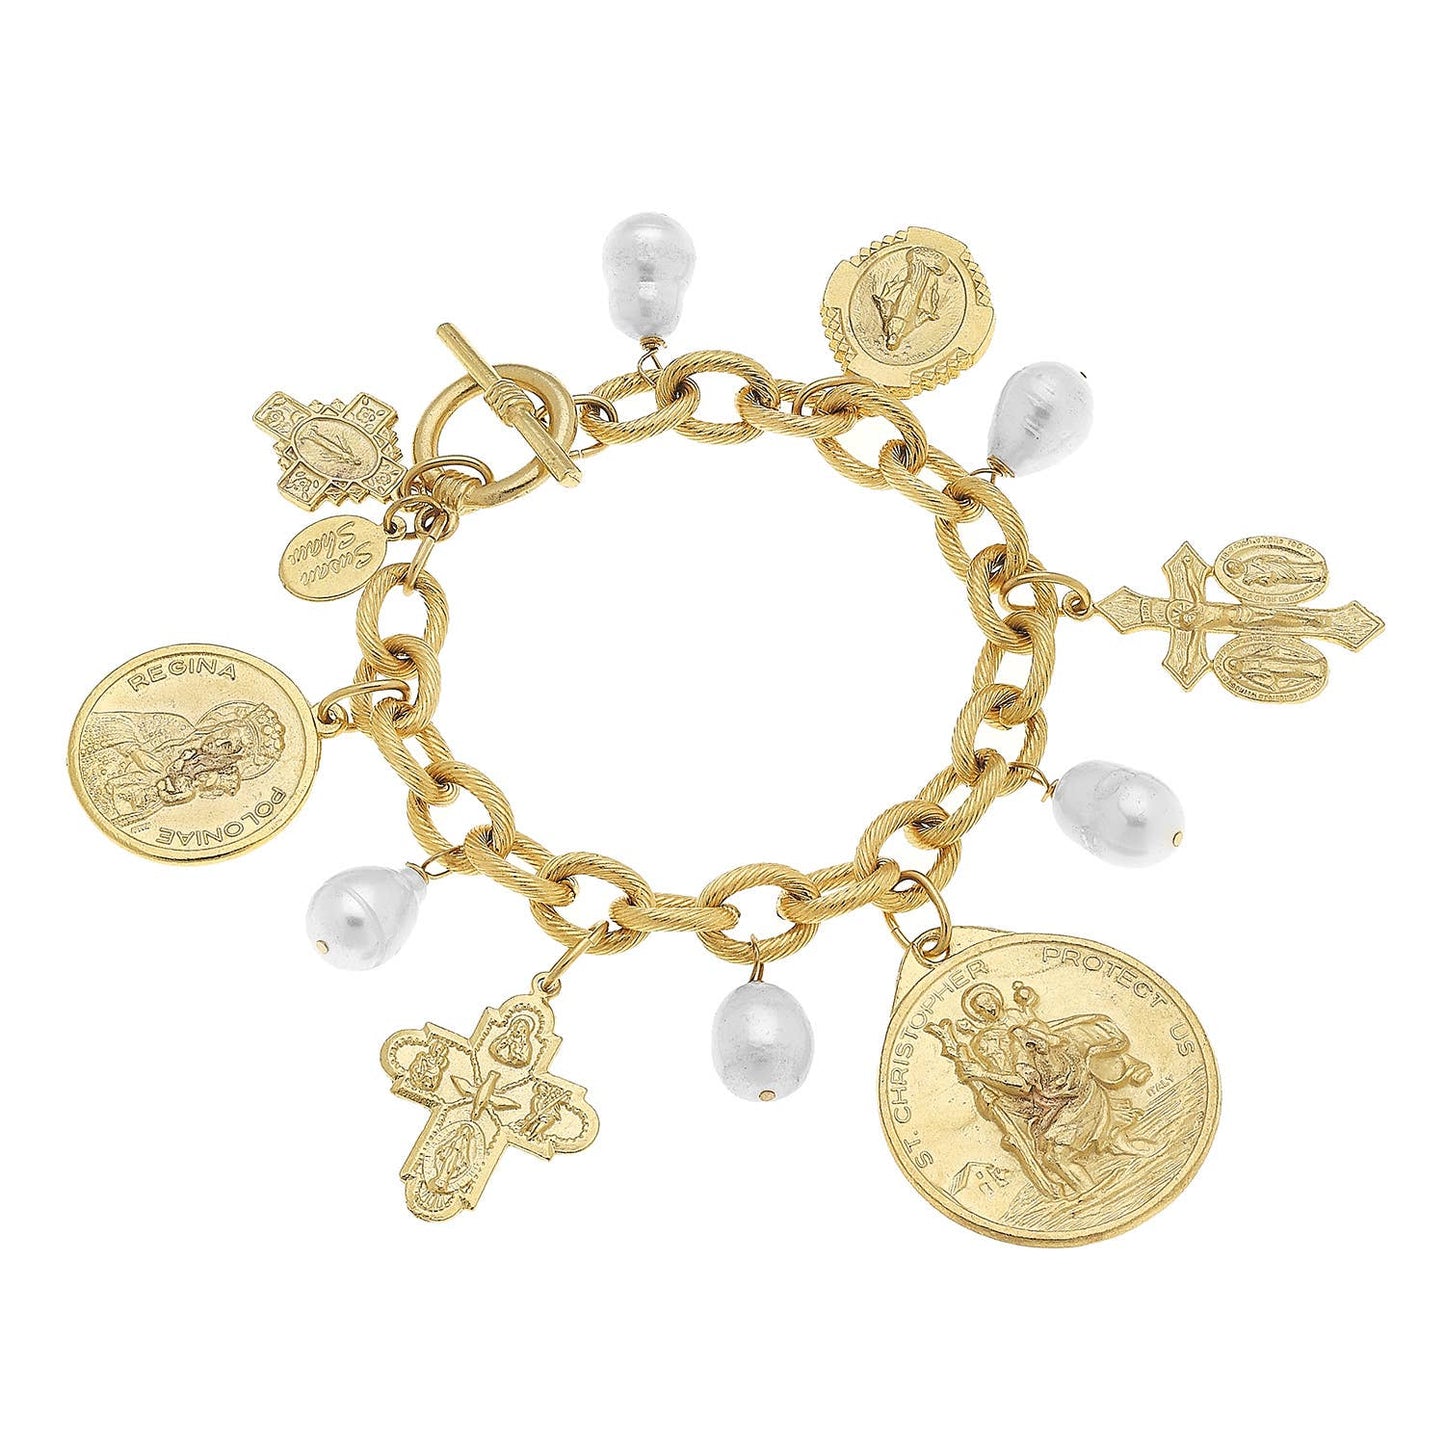 Gold Saints Charm Bracelet with Genuine Freshwater Pearls